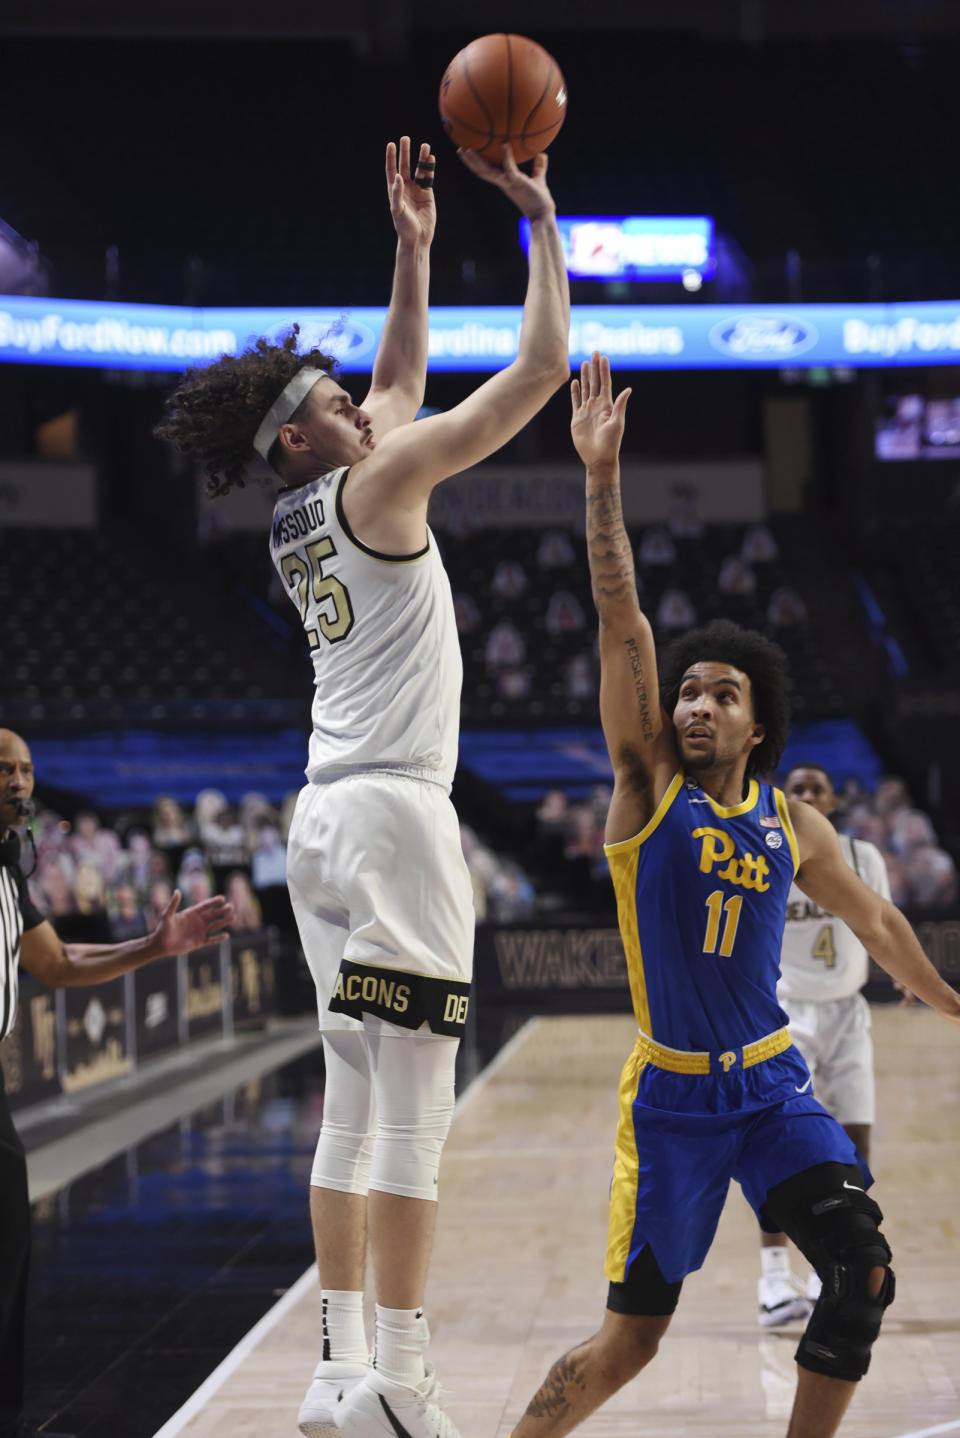 Wake Forest's Ismael Massoud shoots from 3-point range over Pittsburgh's Justin Champagnie during an NCAA college basketball game Saturday, Jan. 23, 2021, in Winston-Salem, N.C. (Walt Unks/The Winston-Salem Journal via AP)